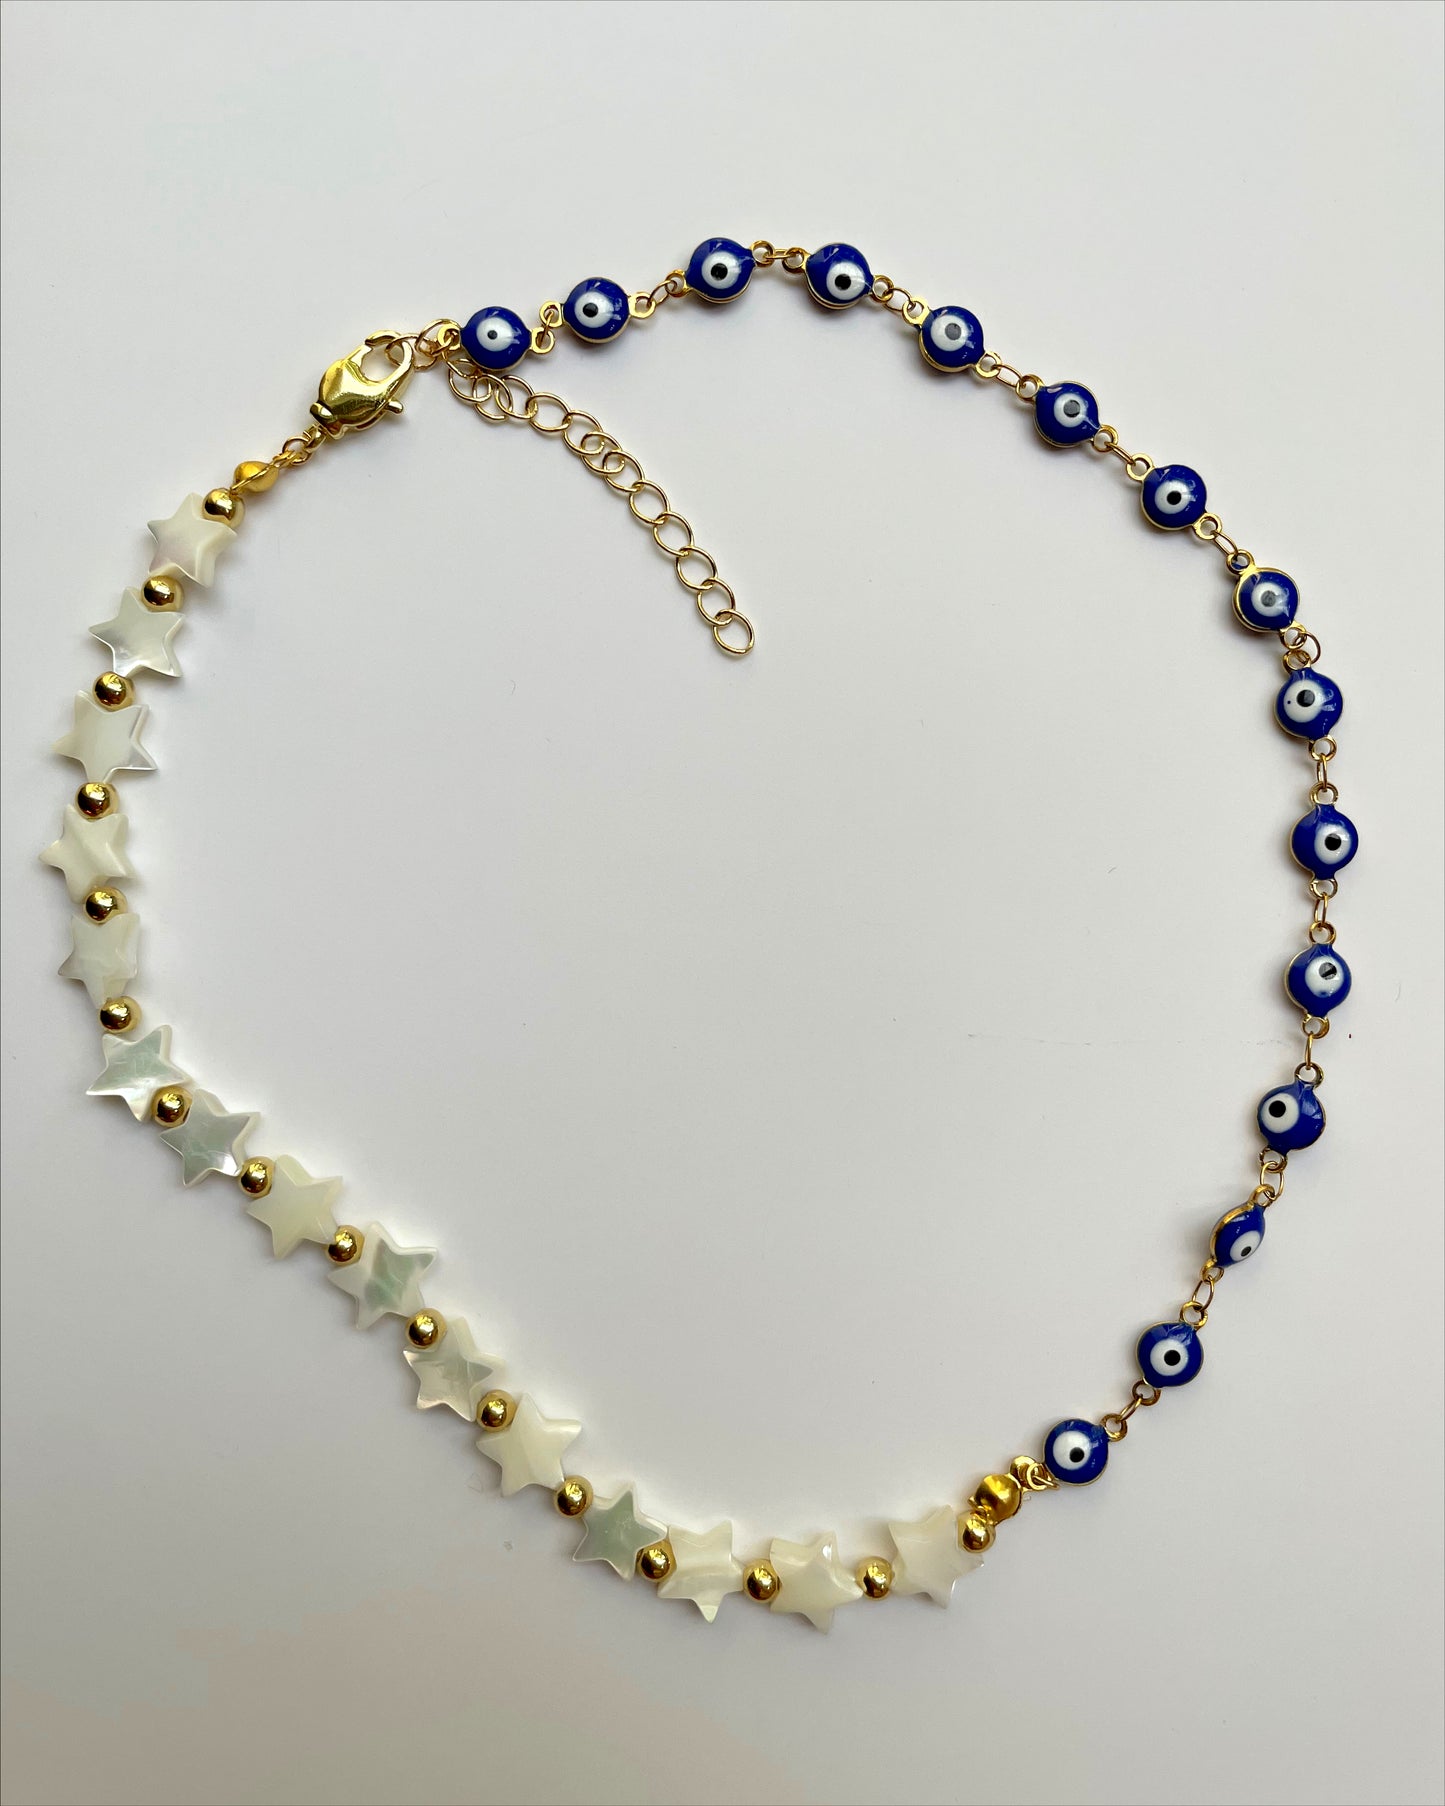 Star and evil eye combined necklace